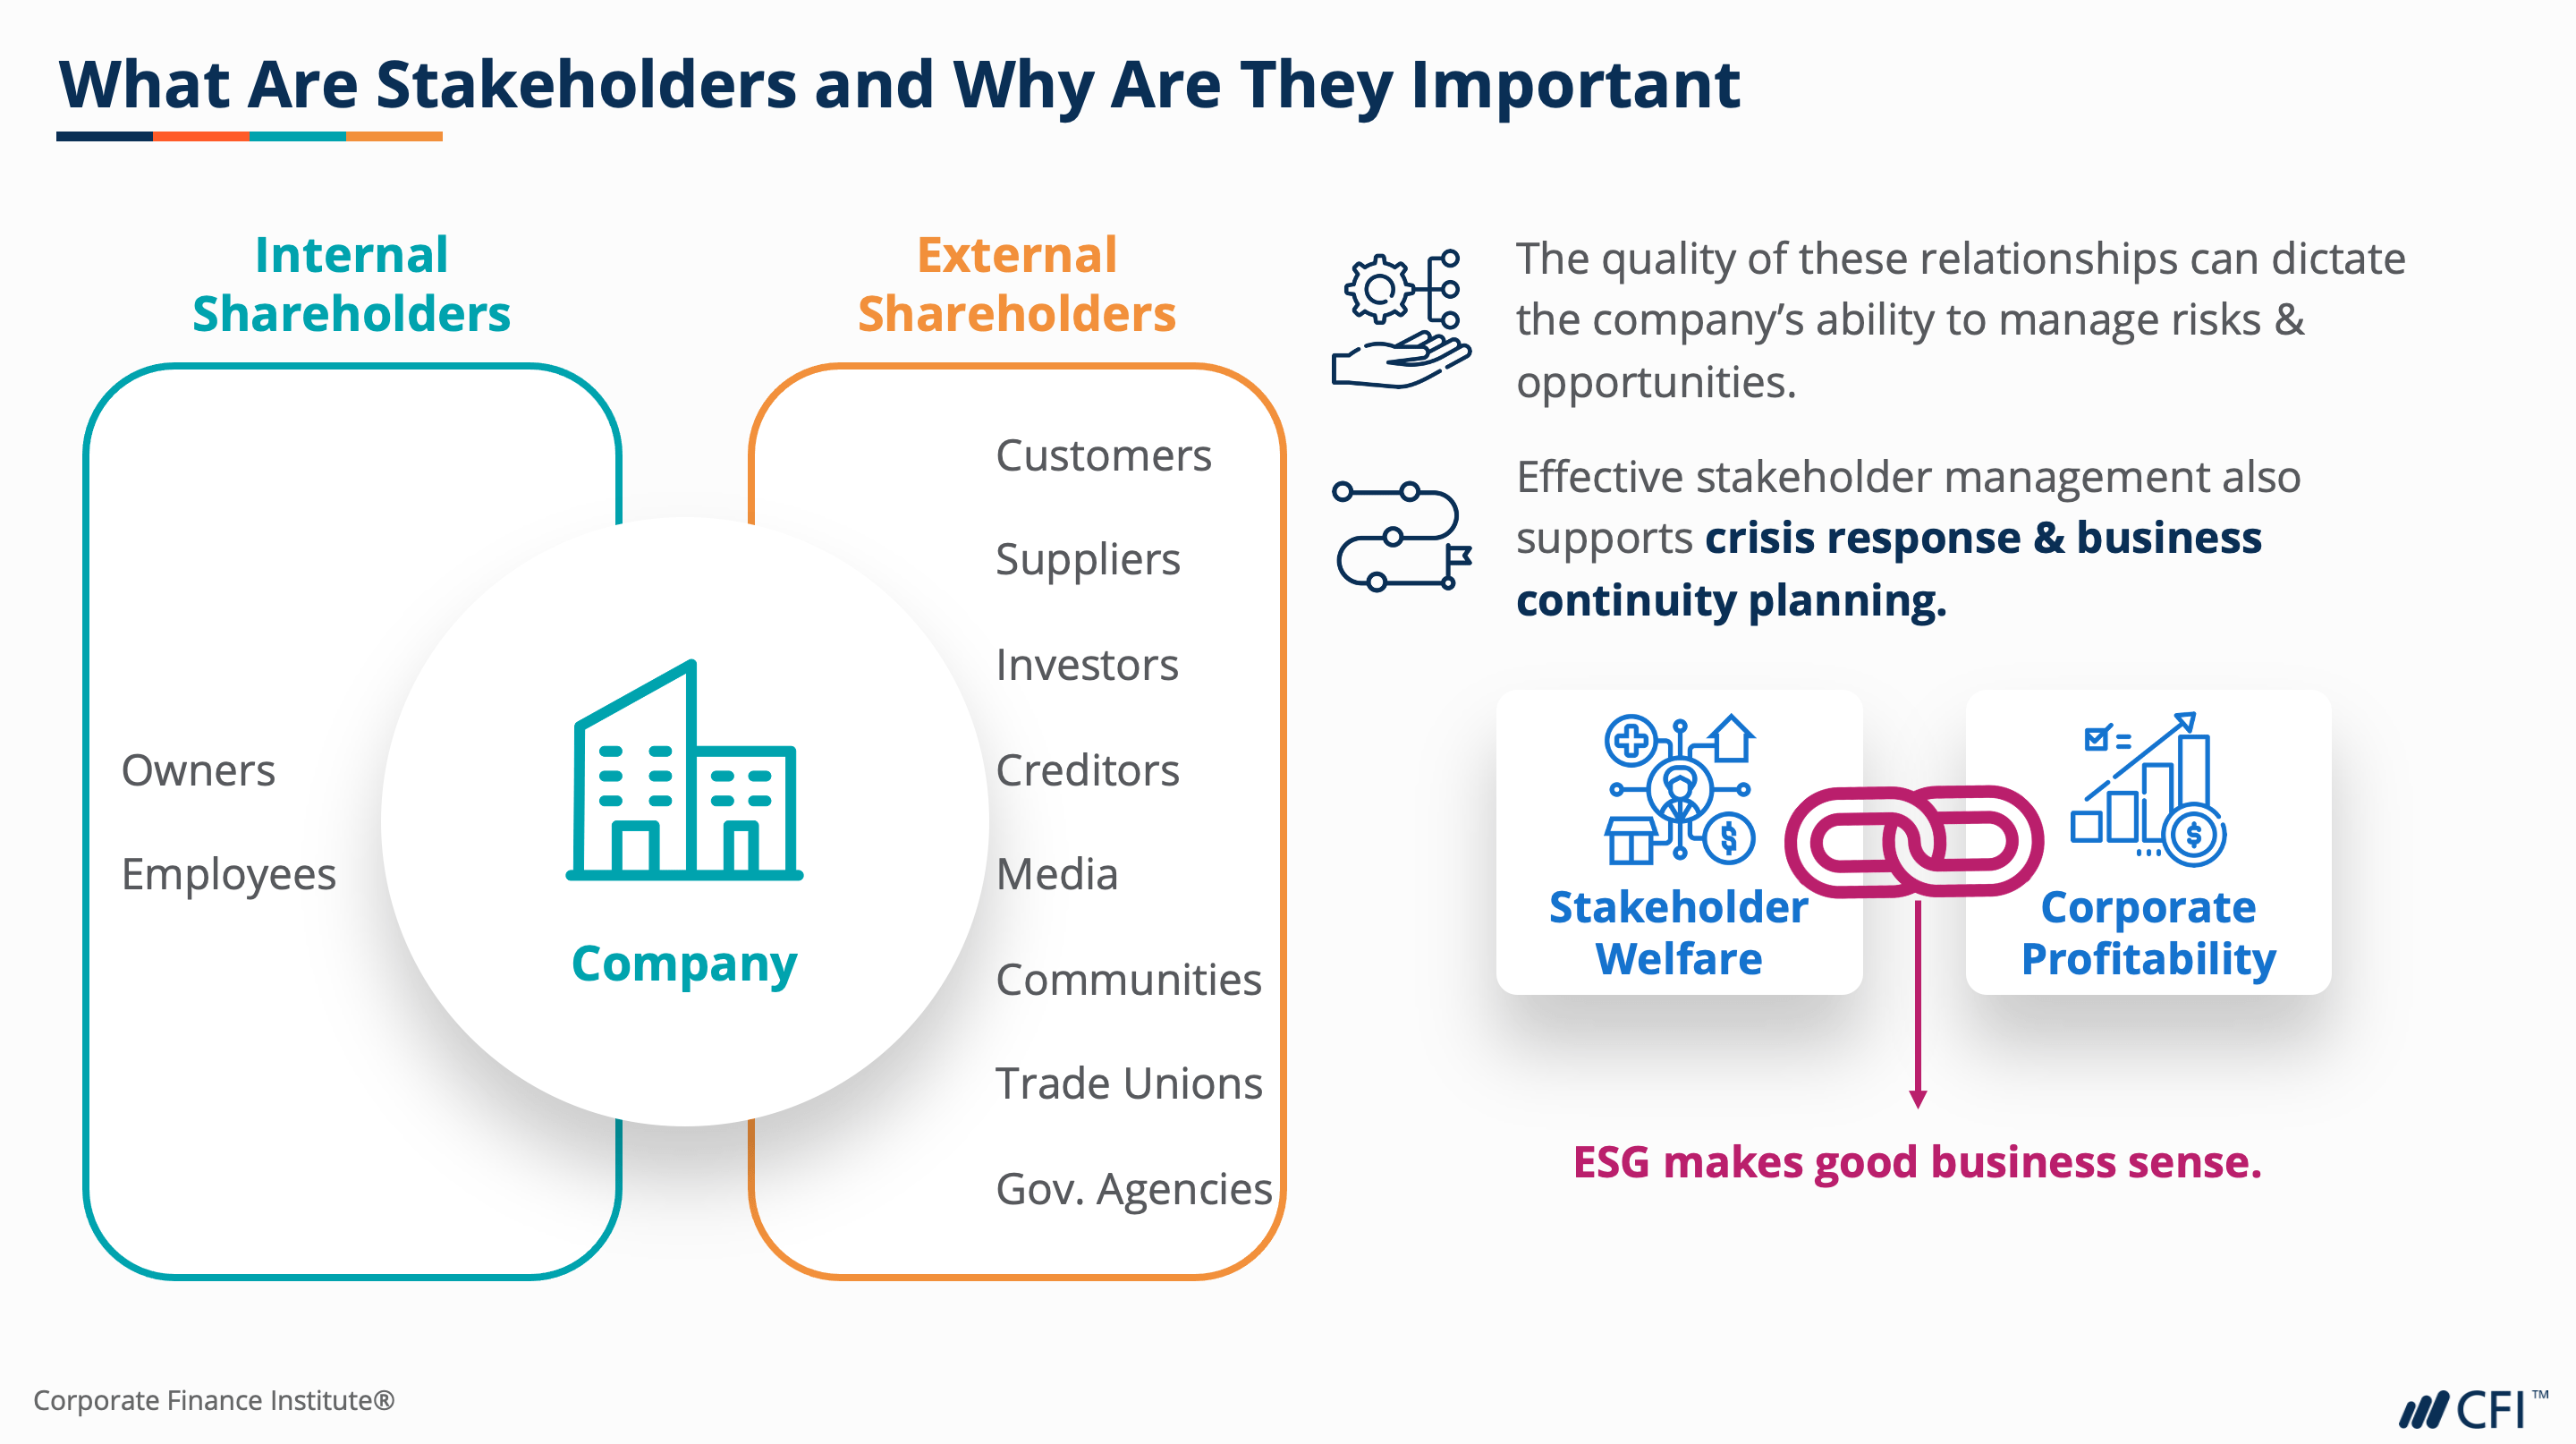 Introduction to ESG